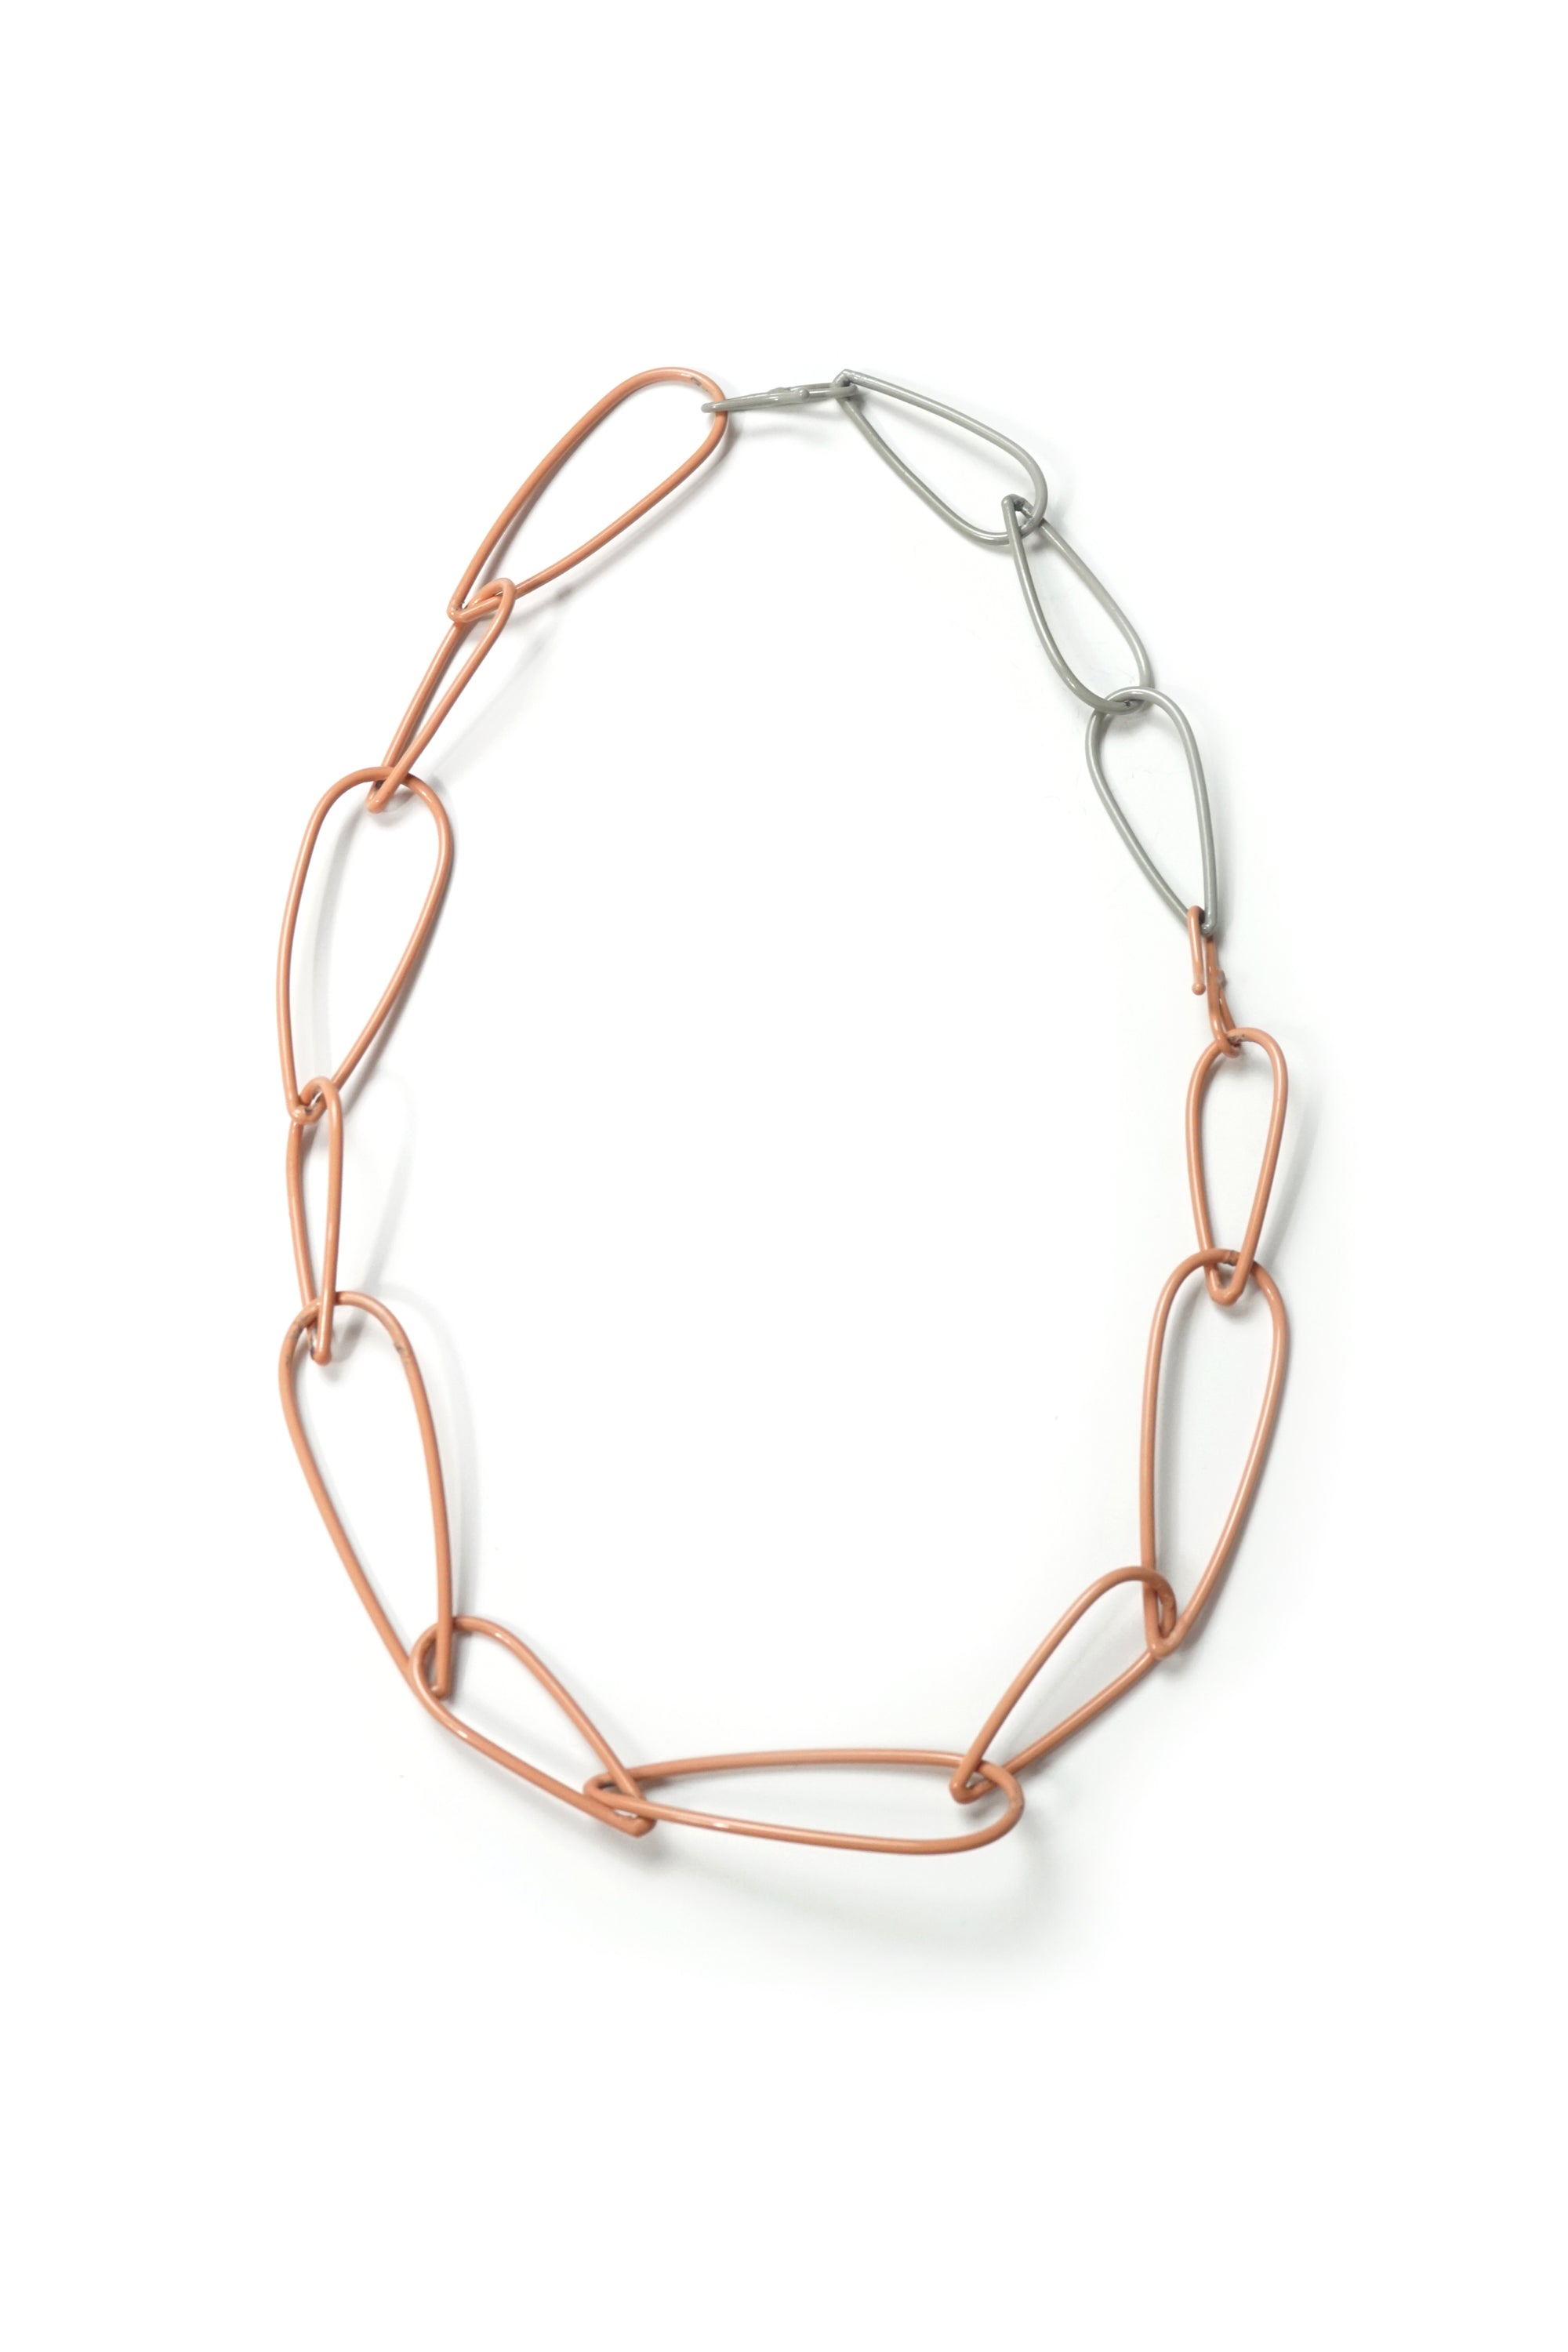 Modular Necklace in Dusty Rose and Stone Grey